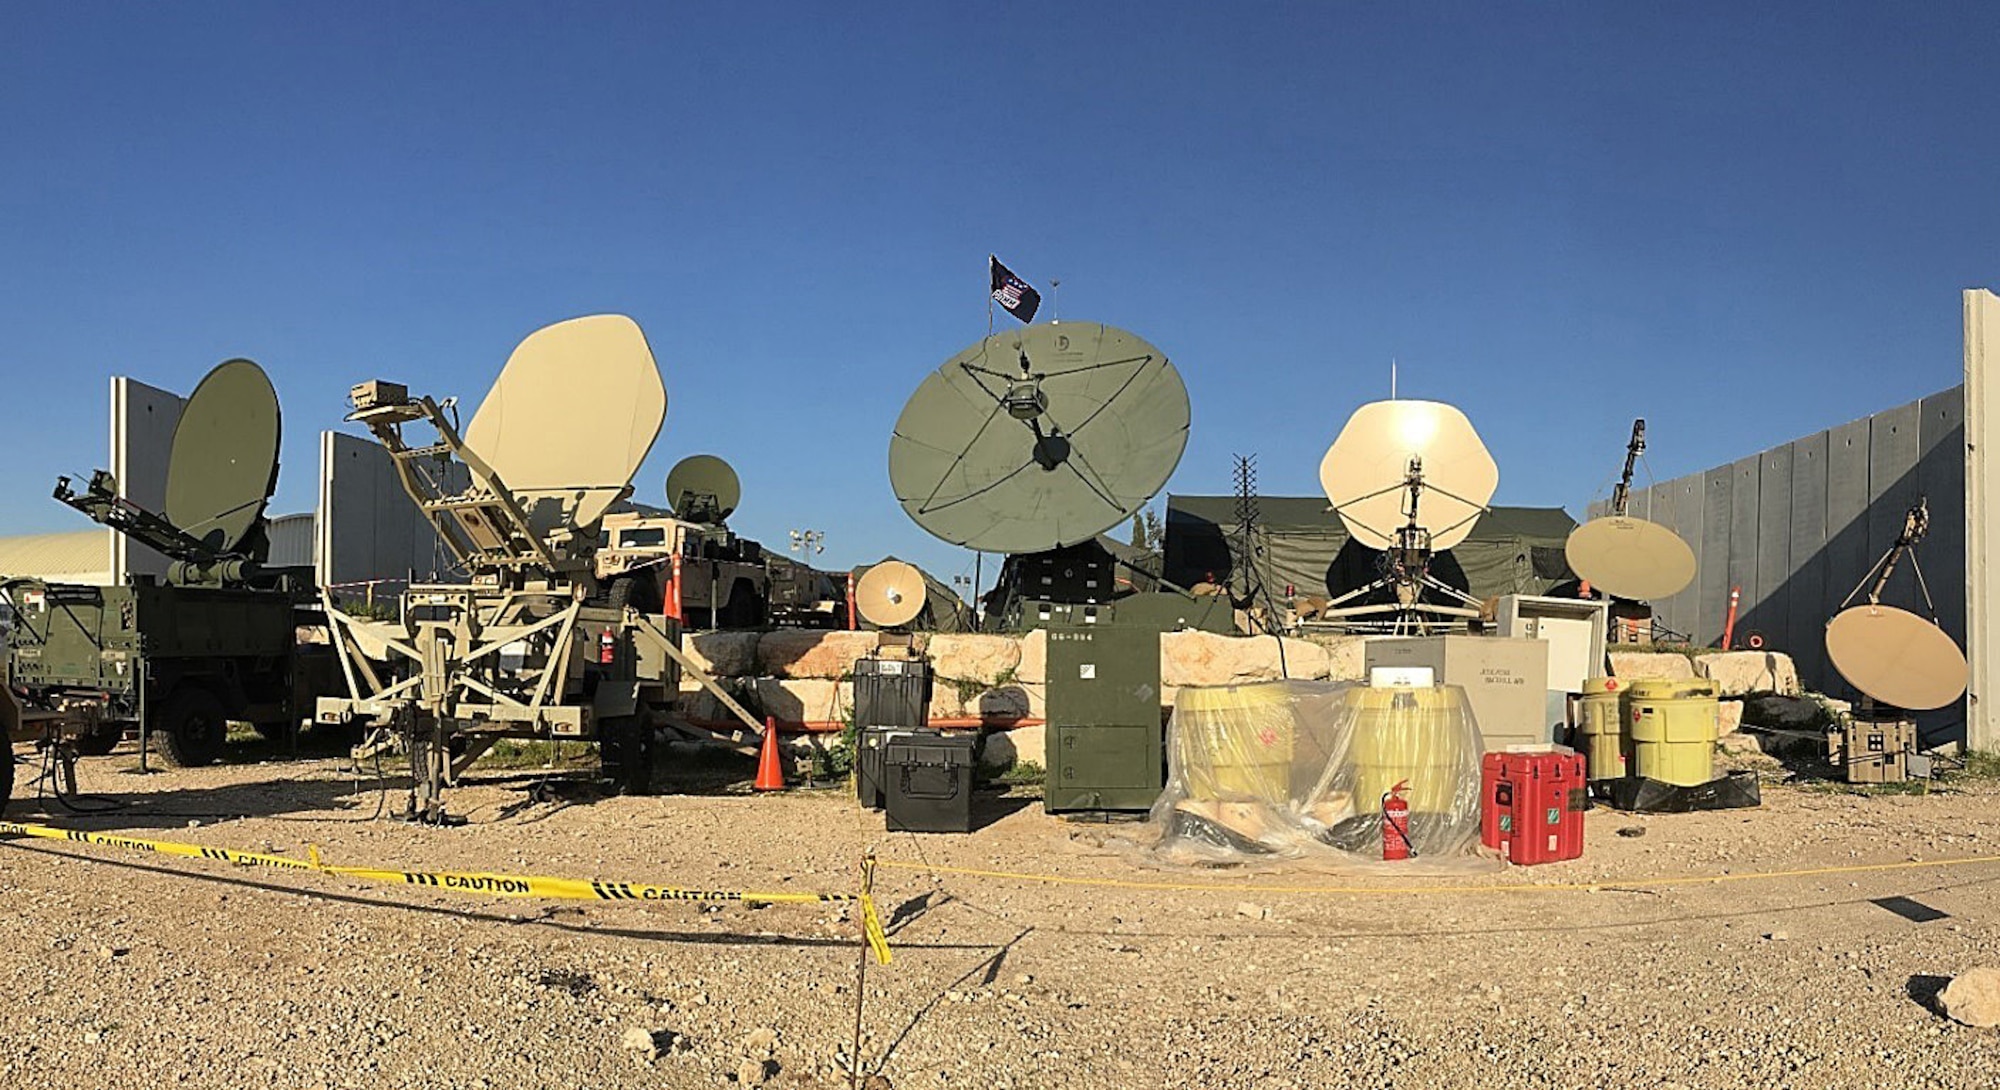 A mass communication center was setup by three combat communications units in support of exercise Juniper Cobra 16, in Israel. This is the first time Airmen from the 1st Combat Communication Squadron (CBCS), 52nd CBCS and soldiers from the 44th Expeditionary Signals Battalion have worked together in a single exercise. ???It normally only takes one unit, but with this large exercise they wanted to deploy multiple units to see how it works in the event that we would have to support a real-world situation,??? said Staff Sgt. Shirim Bishop, 1st CBCS tactical network operations supervisor temporarily deployed from Ramstein Air Base, Germany. (U.S. Air Force photo by Staff Sgt. Stephanie Longoria/Released)